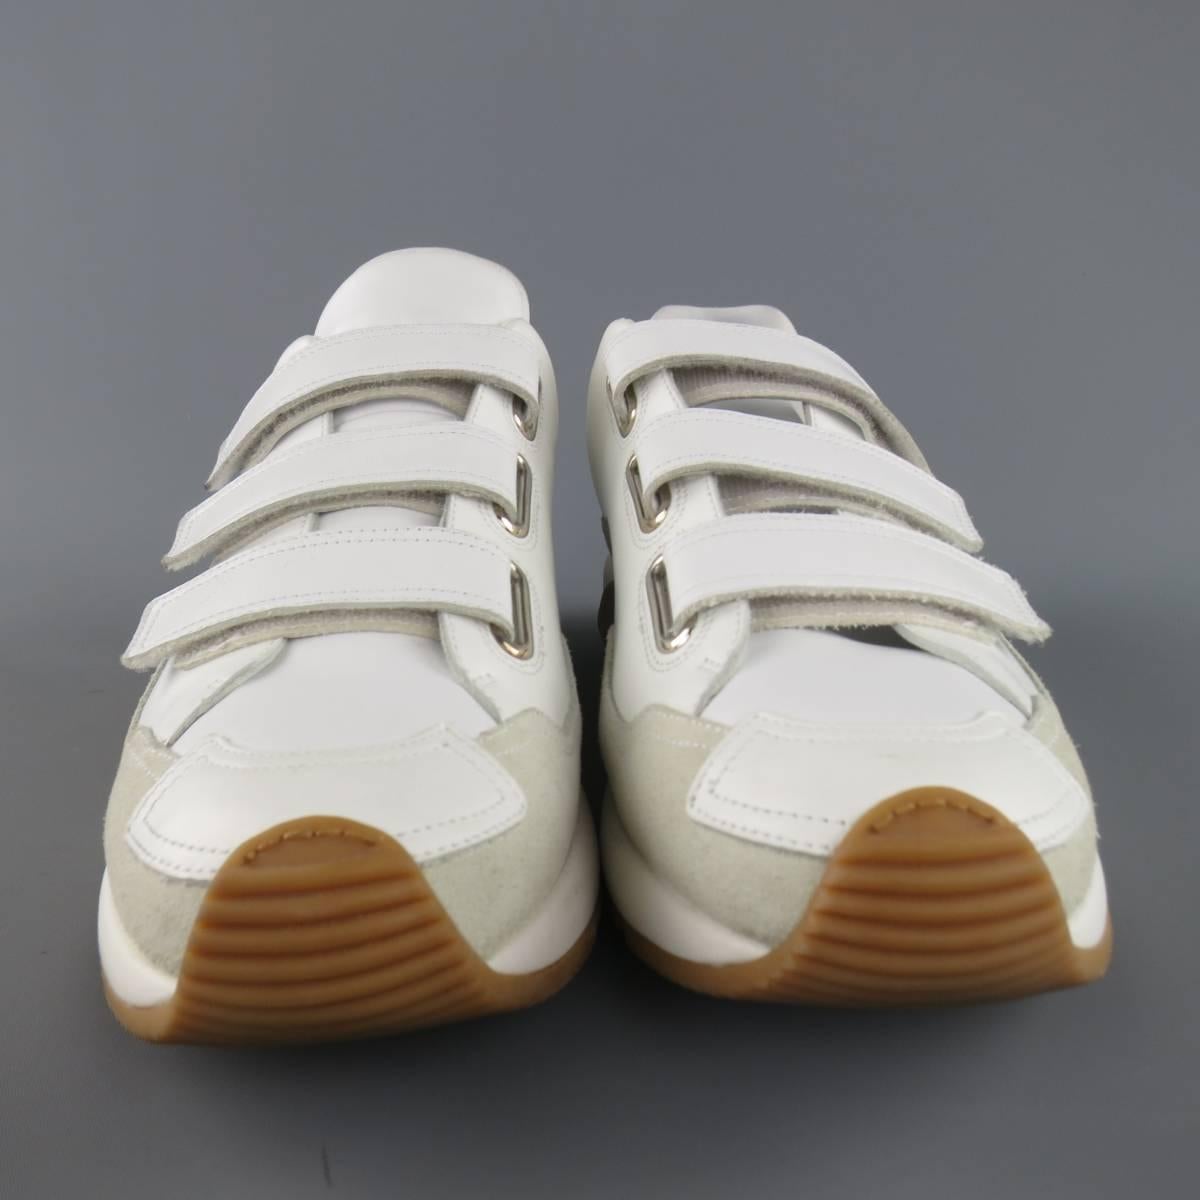 DIOR HOMME runway sneakers consists of leather material in a white color tone. Designed in a round-toe front, velcro strap vamp-closure with tone-on-tone stitching along edges. Detailed with suede trim along sides in a light beige color and tan